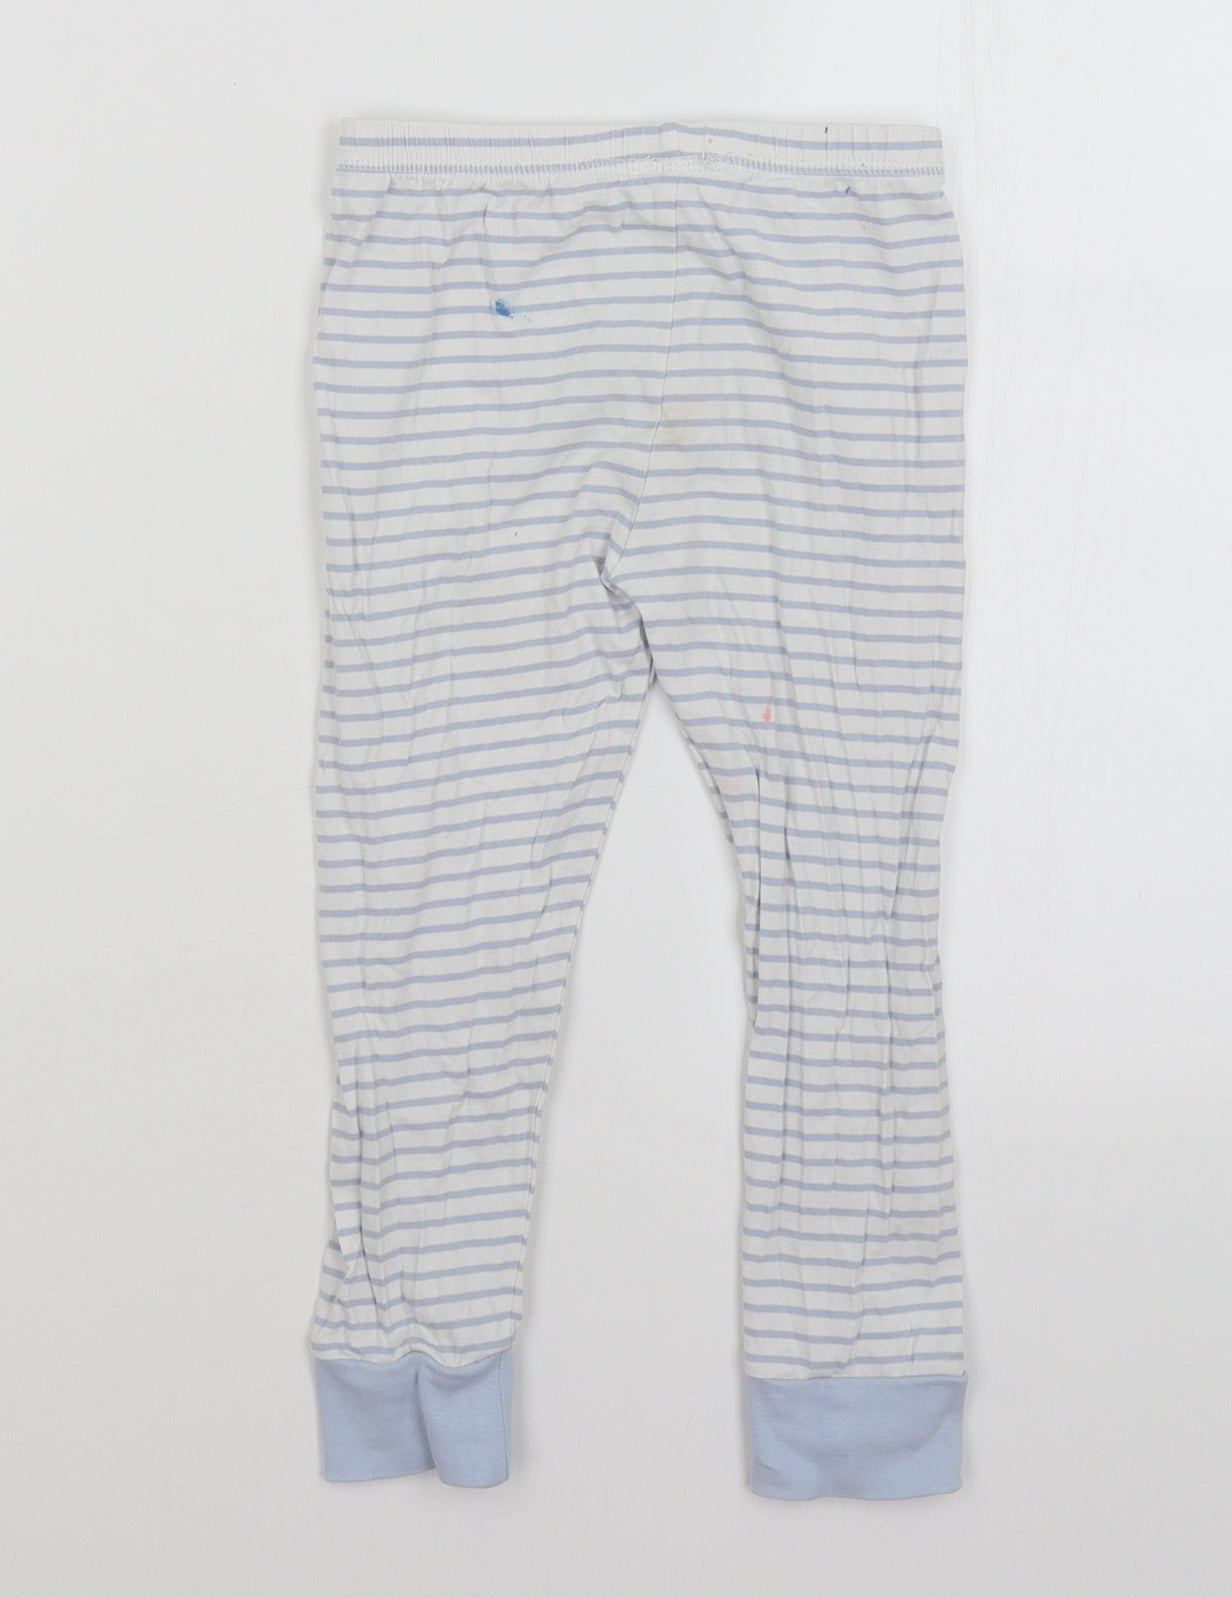 George Boys White Striped  Capri Trousers Size 3-4 Years